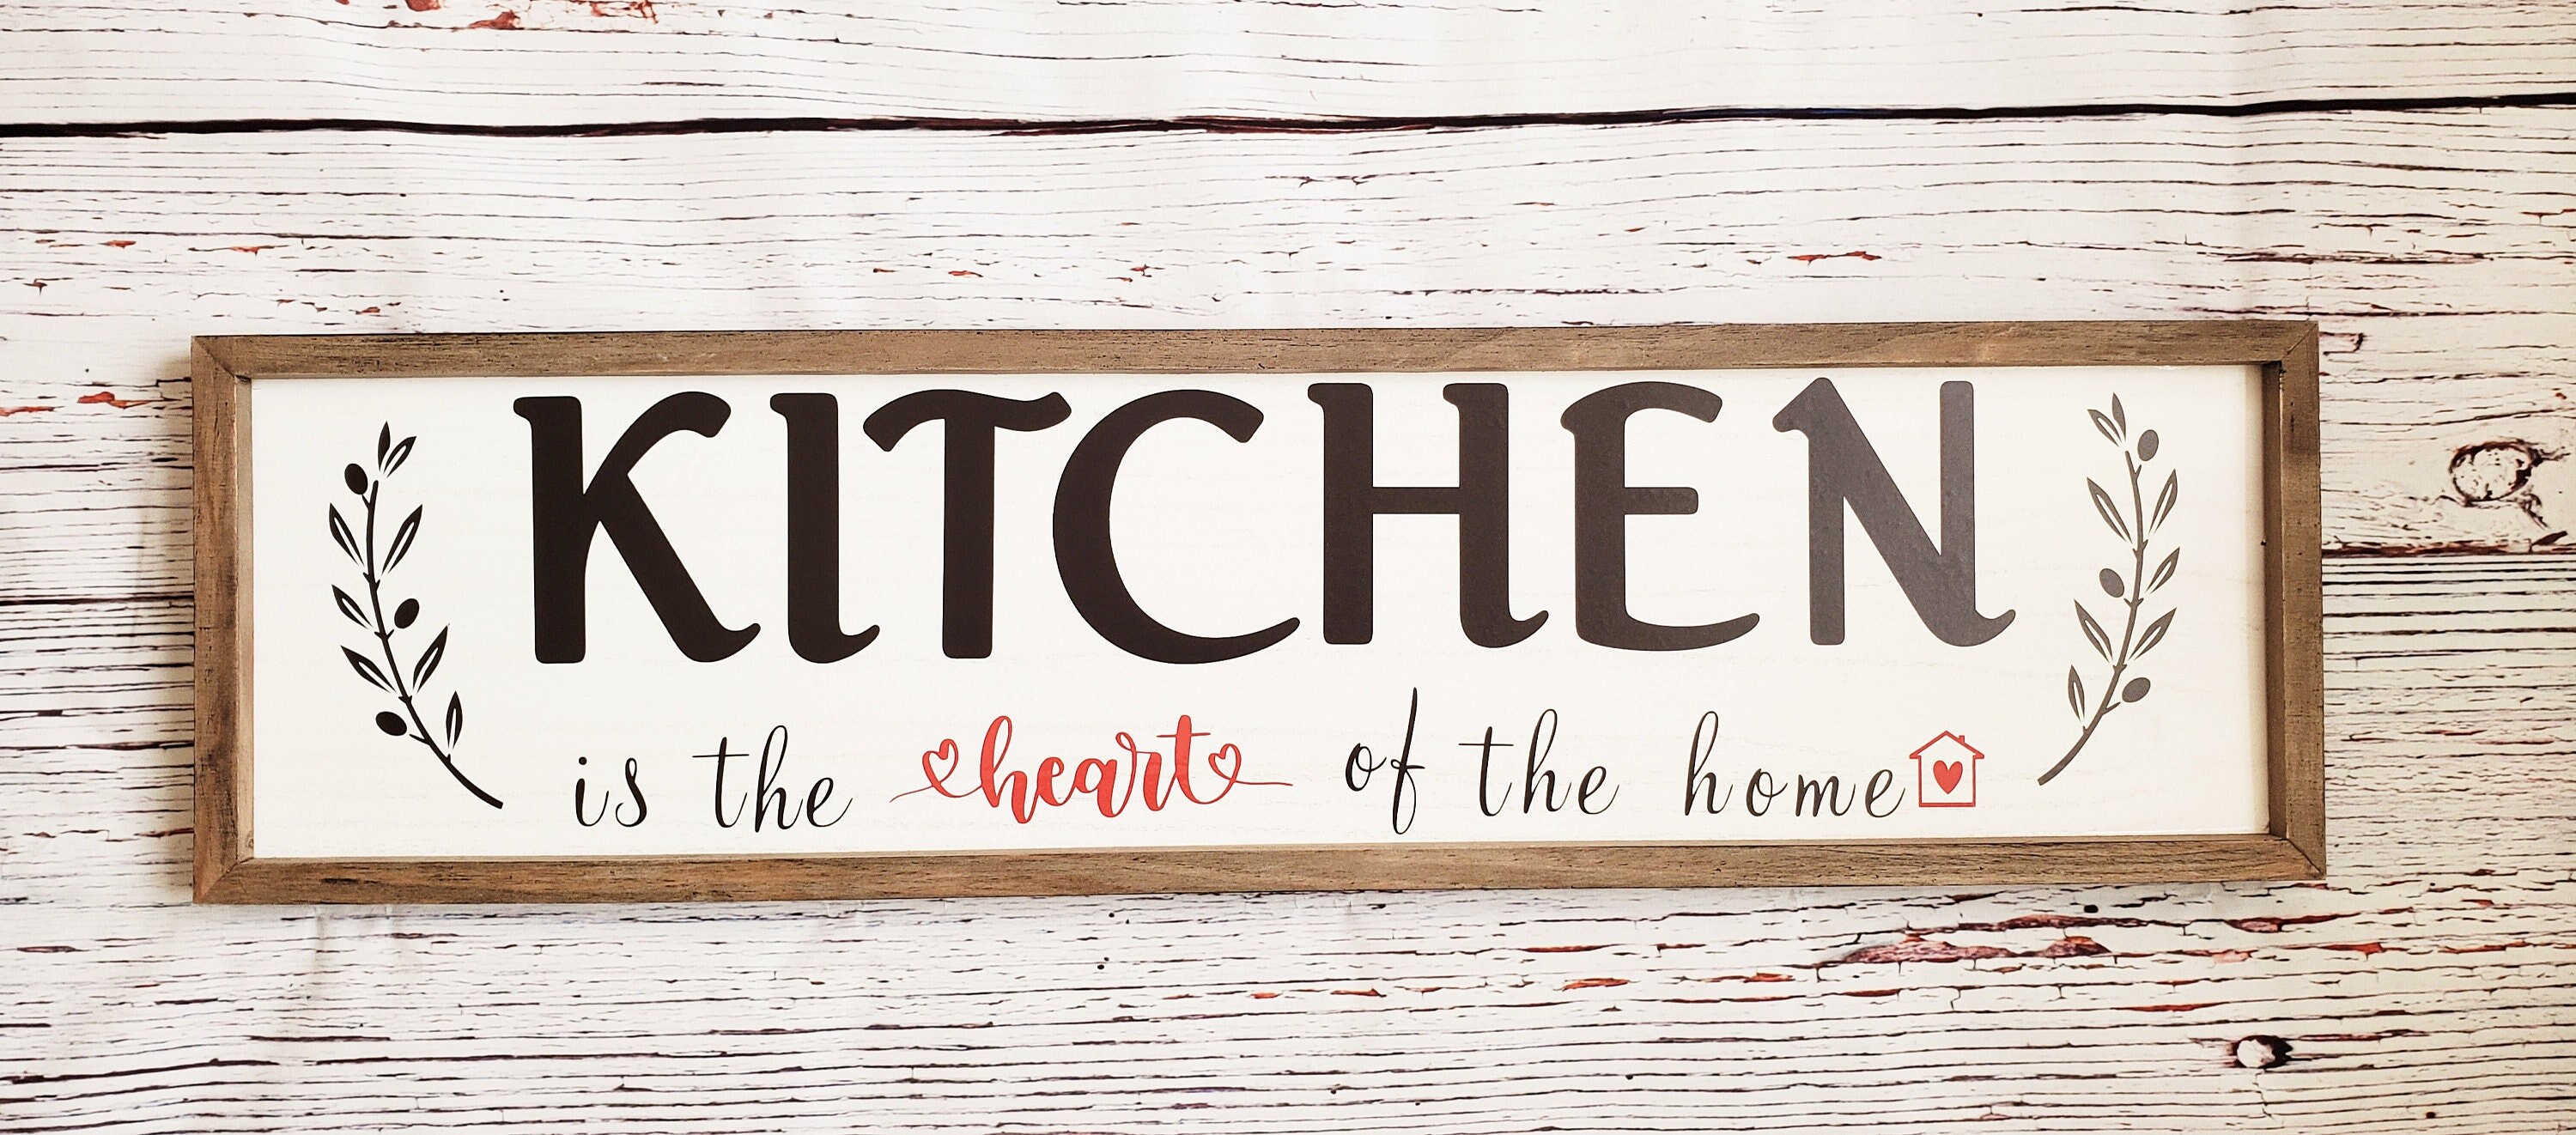  Kitchen Sign Set Kitchen Wall Decor The Heart of The